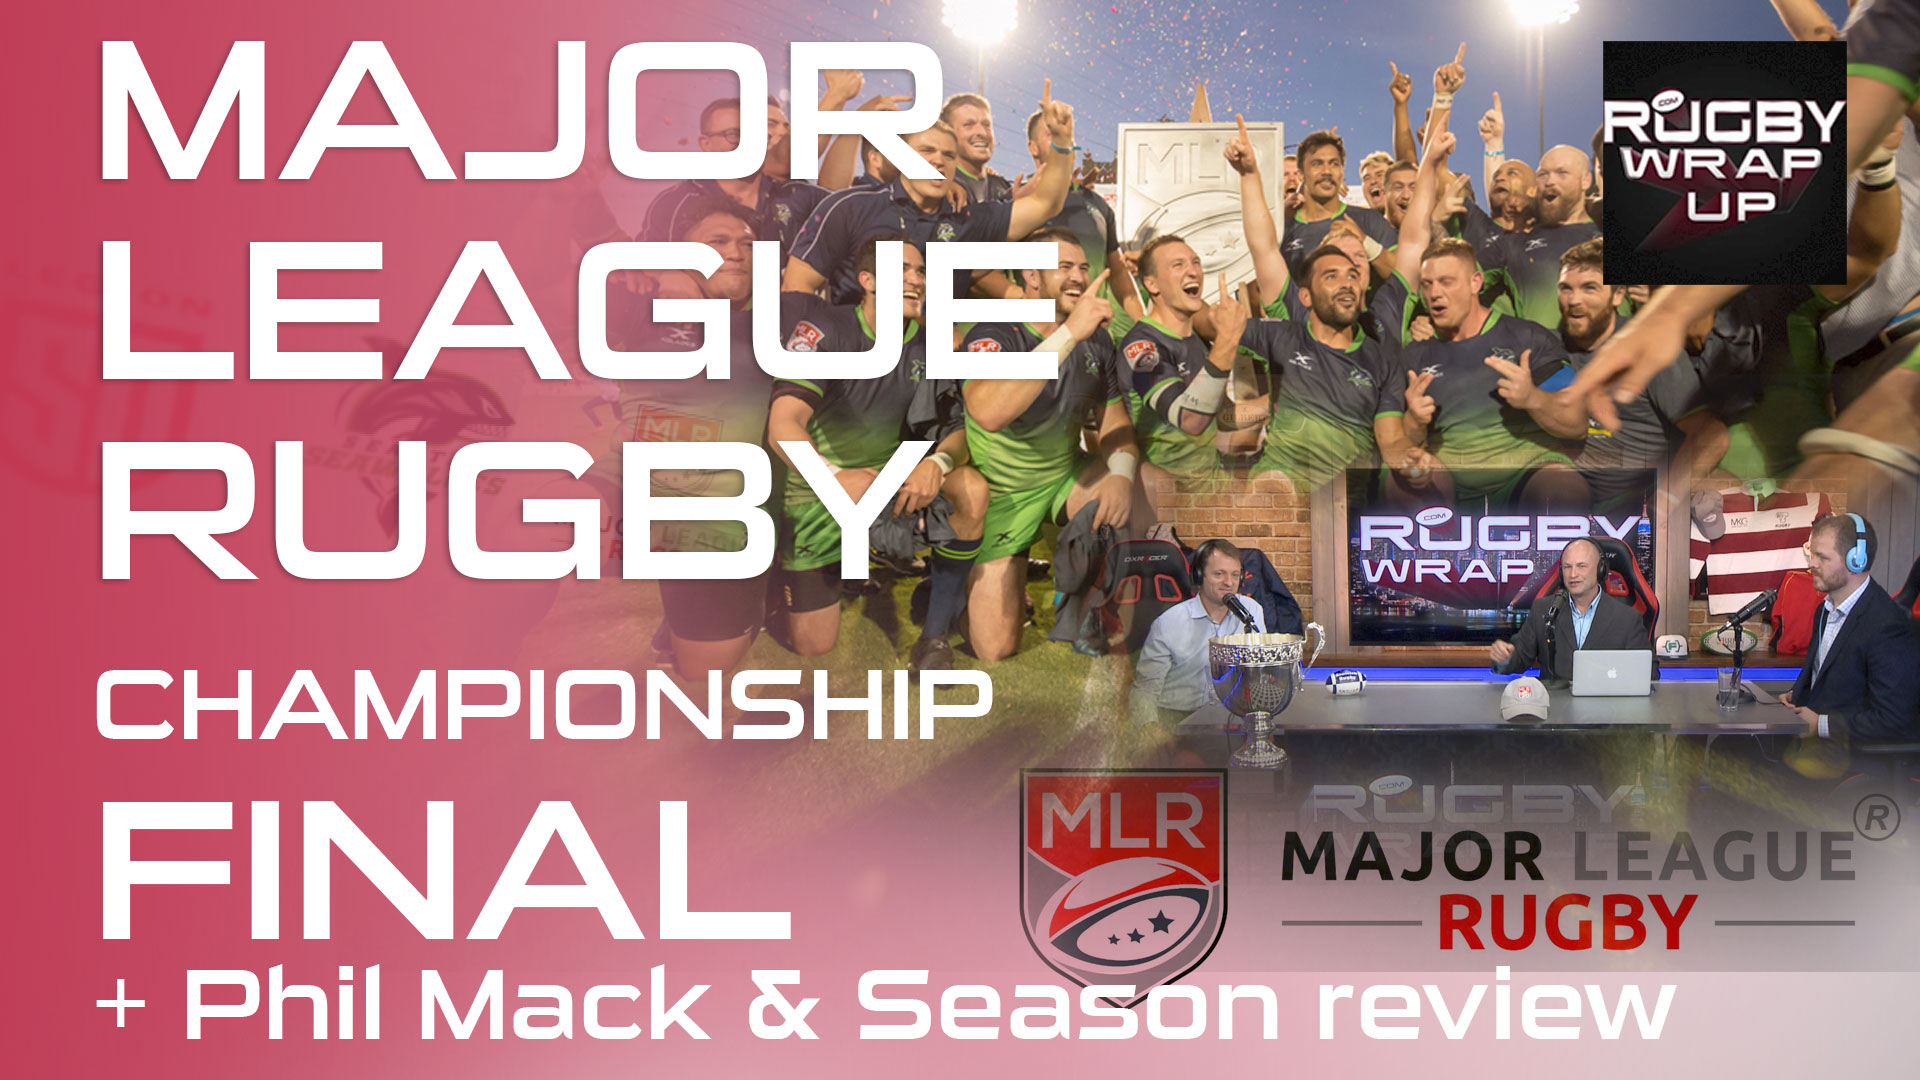 Major Leauge Rugby Final: Analysis, Phil Mack, McCarthy, Pengelly, Ginty